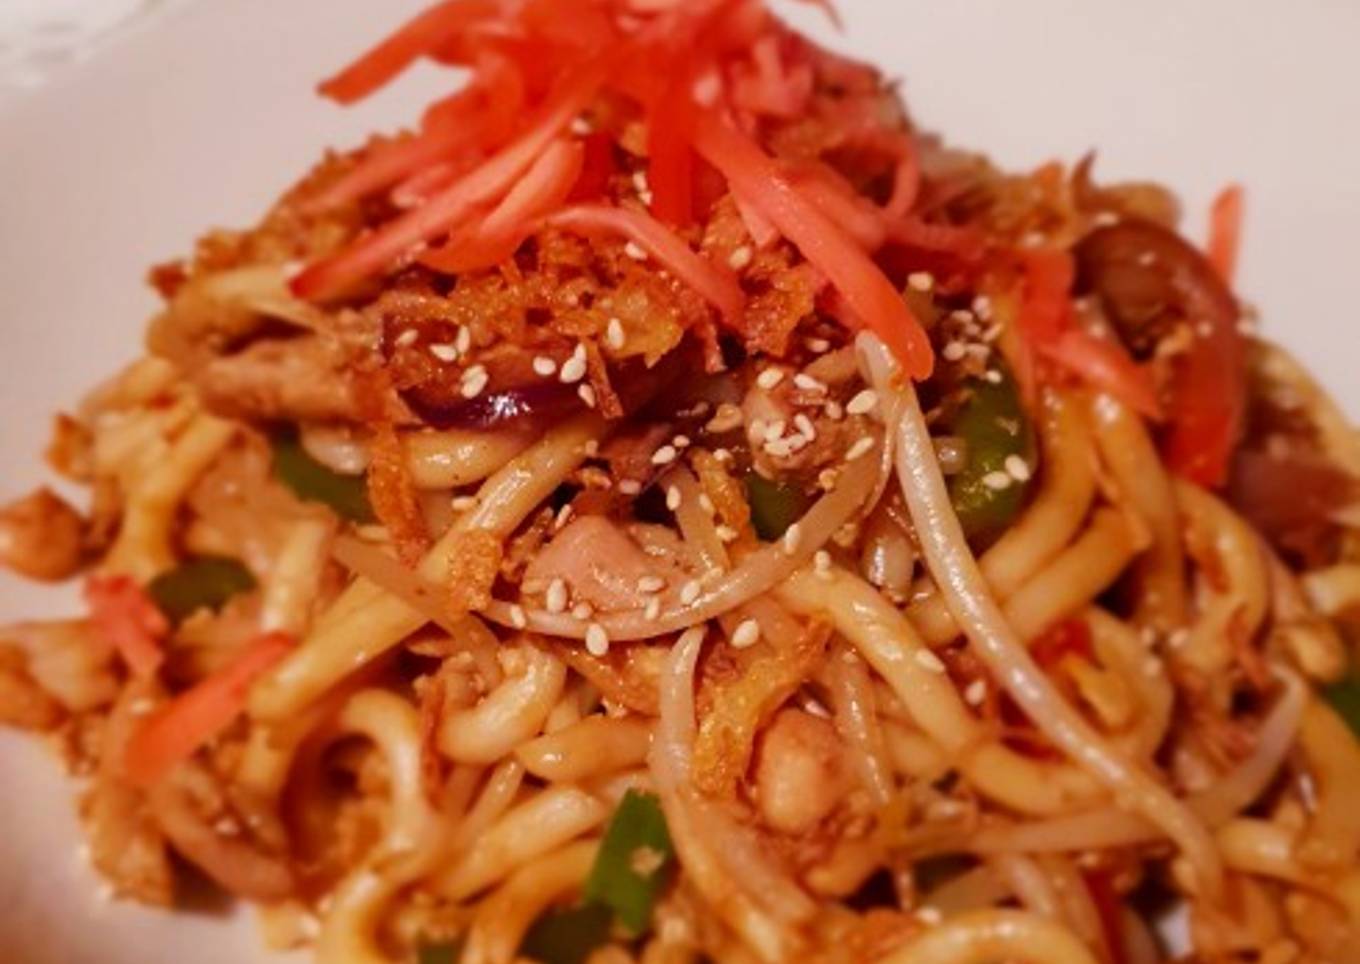 Chicken stir fry with noodle